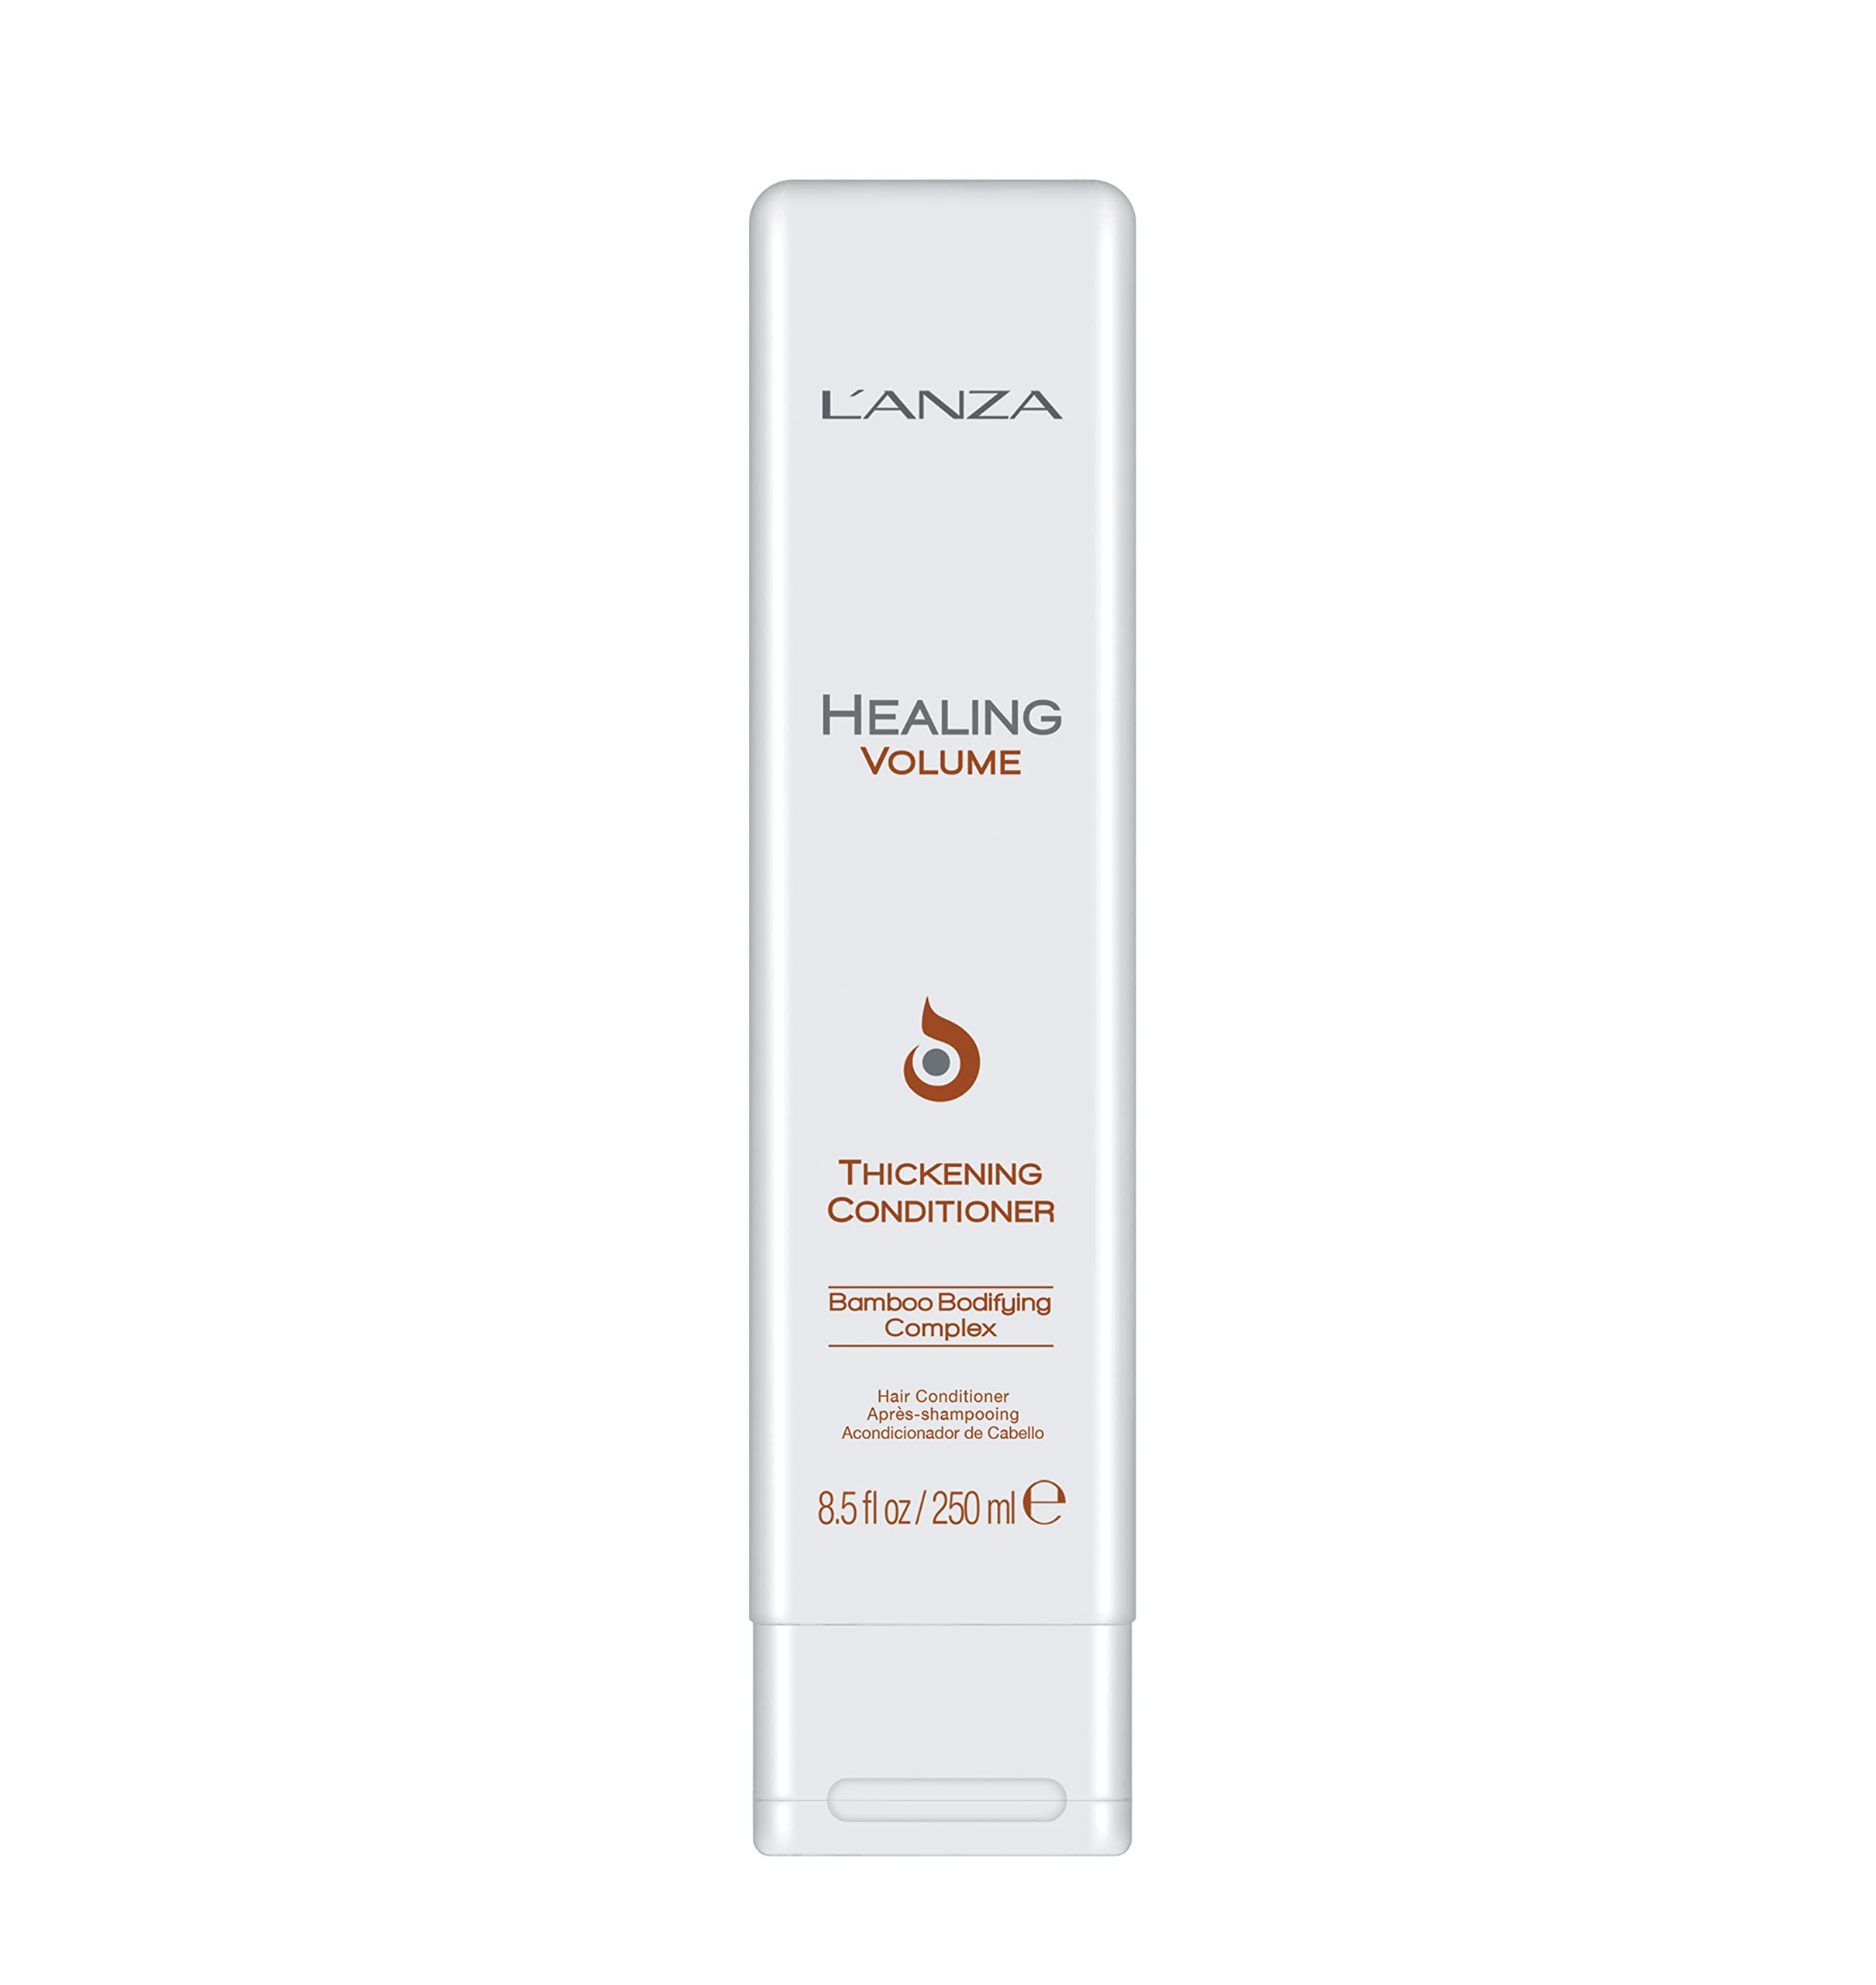 L'ANZA Healing Volume Thickening Conditioner Boosts Shine and Thickness to Fine Flat Hair Rich with Bamboo Bodifying Complex Keratin Fl Oz